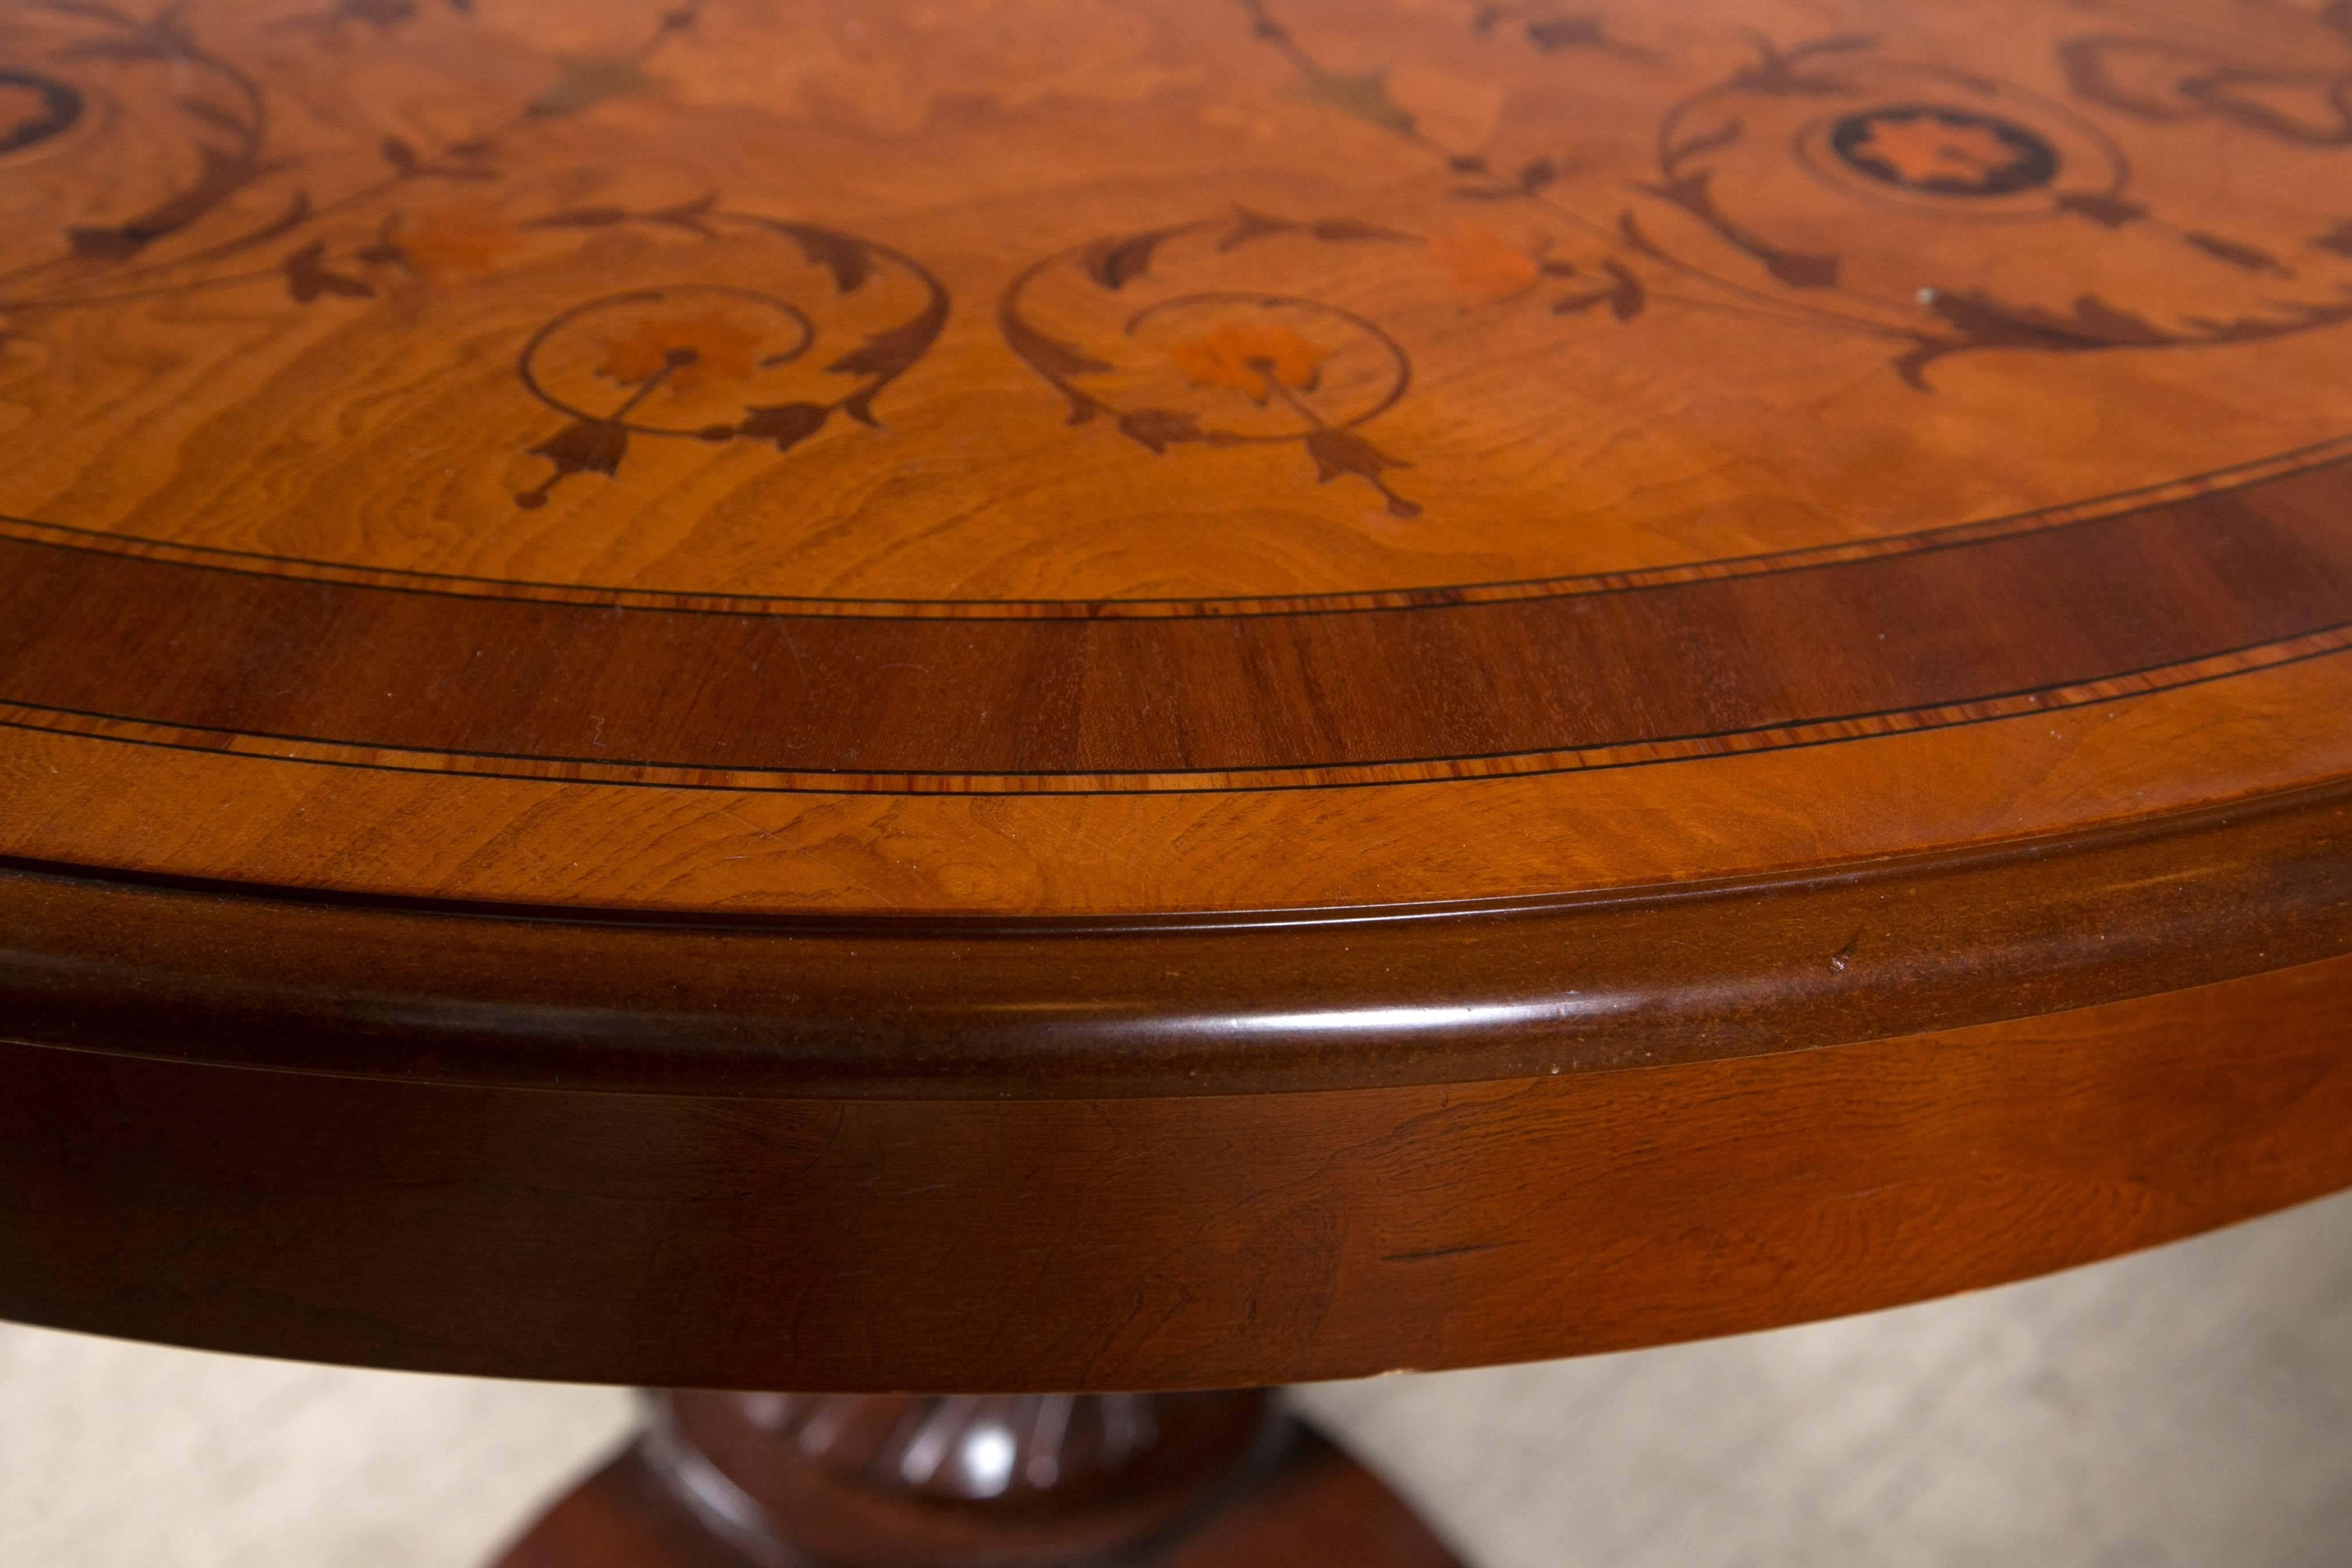 The round top, done in burl veneers, with inlaid outer band and borders, garlands, ribbons and flowers in mahogany, sycamore, walnut. Unusual pedestal with octagonal top, middle turning, swirled. On a four-scrolling and curled legs.